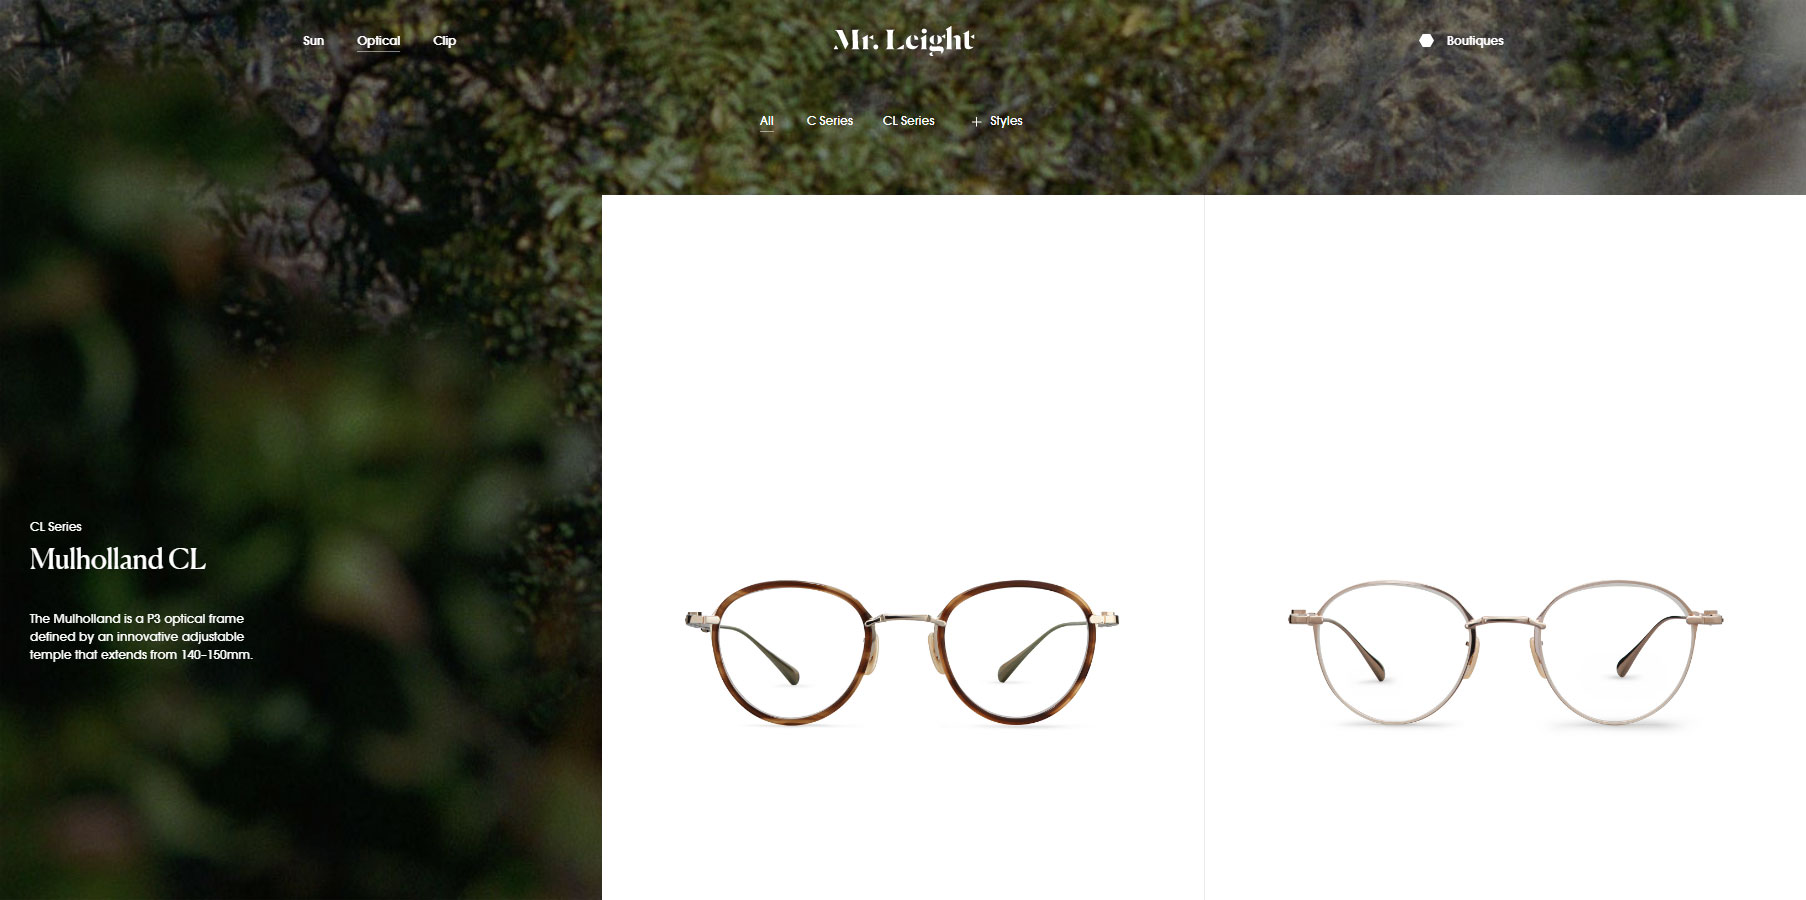 Mr. Leight - Website of the Day